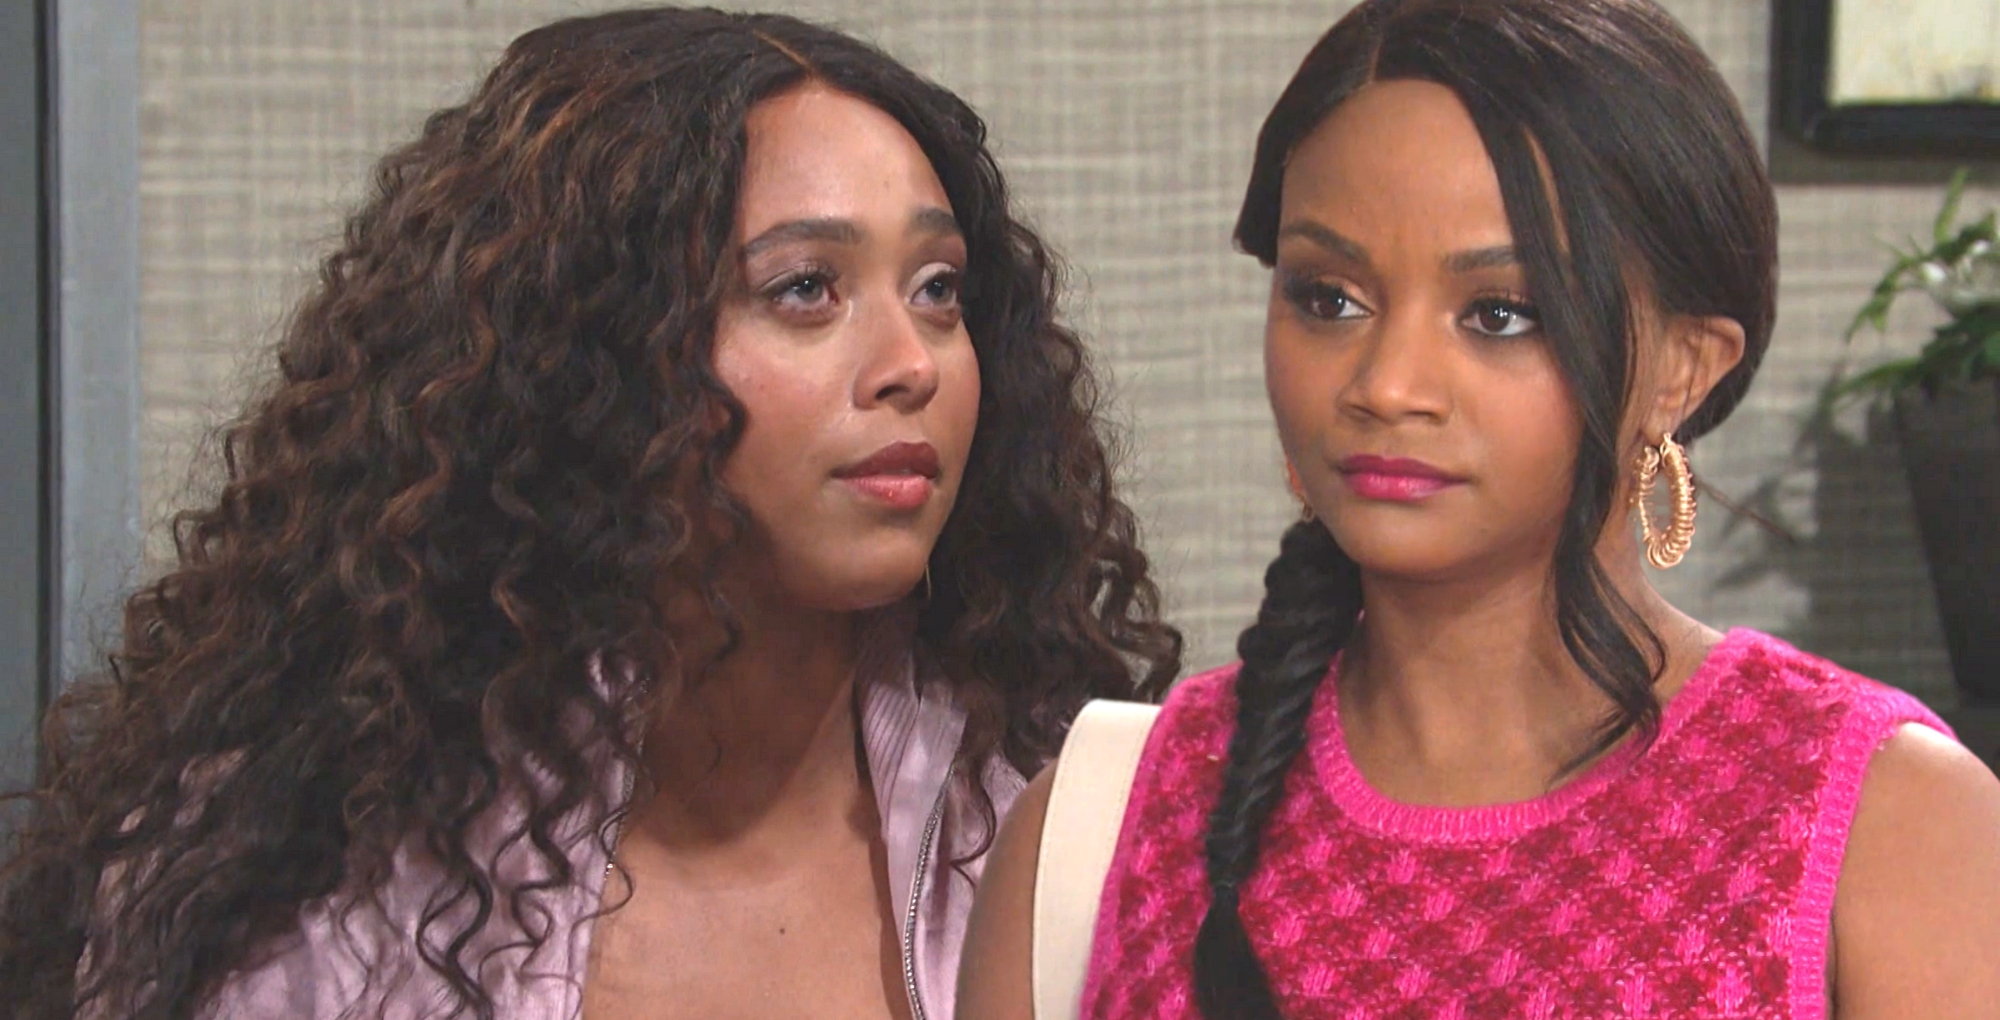 talia hunter and chanel dupree on days of our lives.